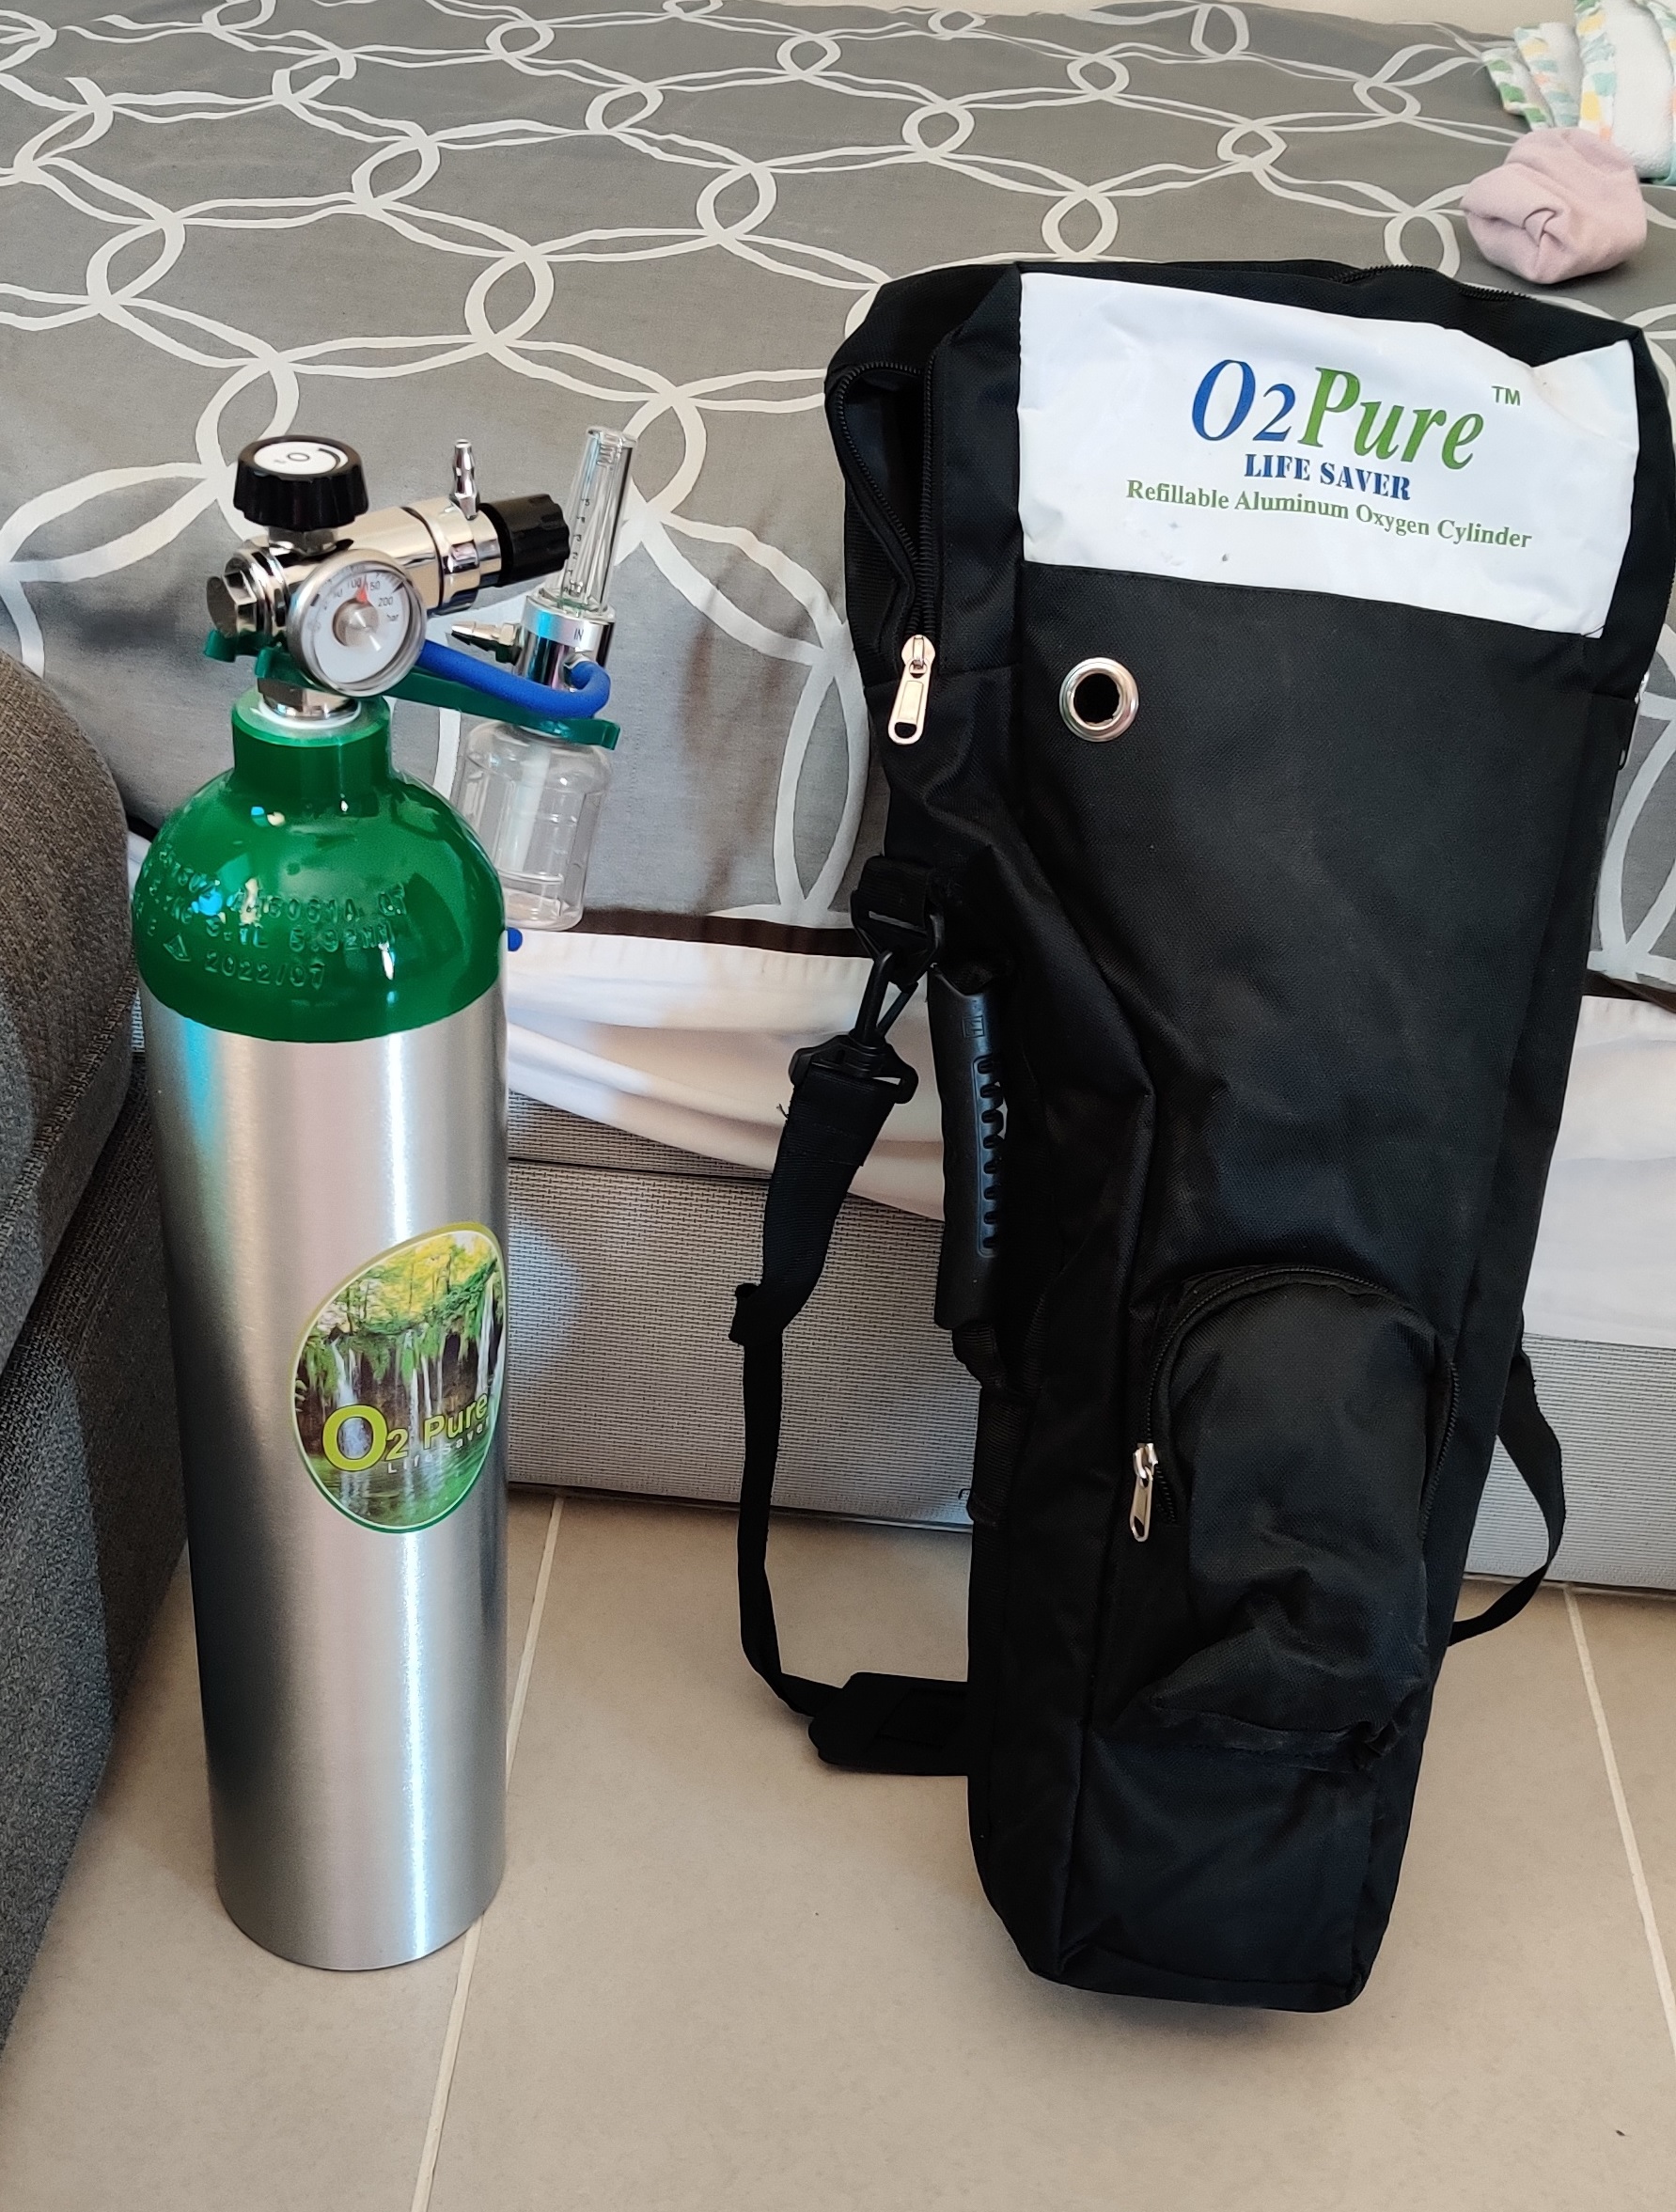 Medical grade Oxygen tank 5l - Comes with 2 canulas